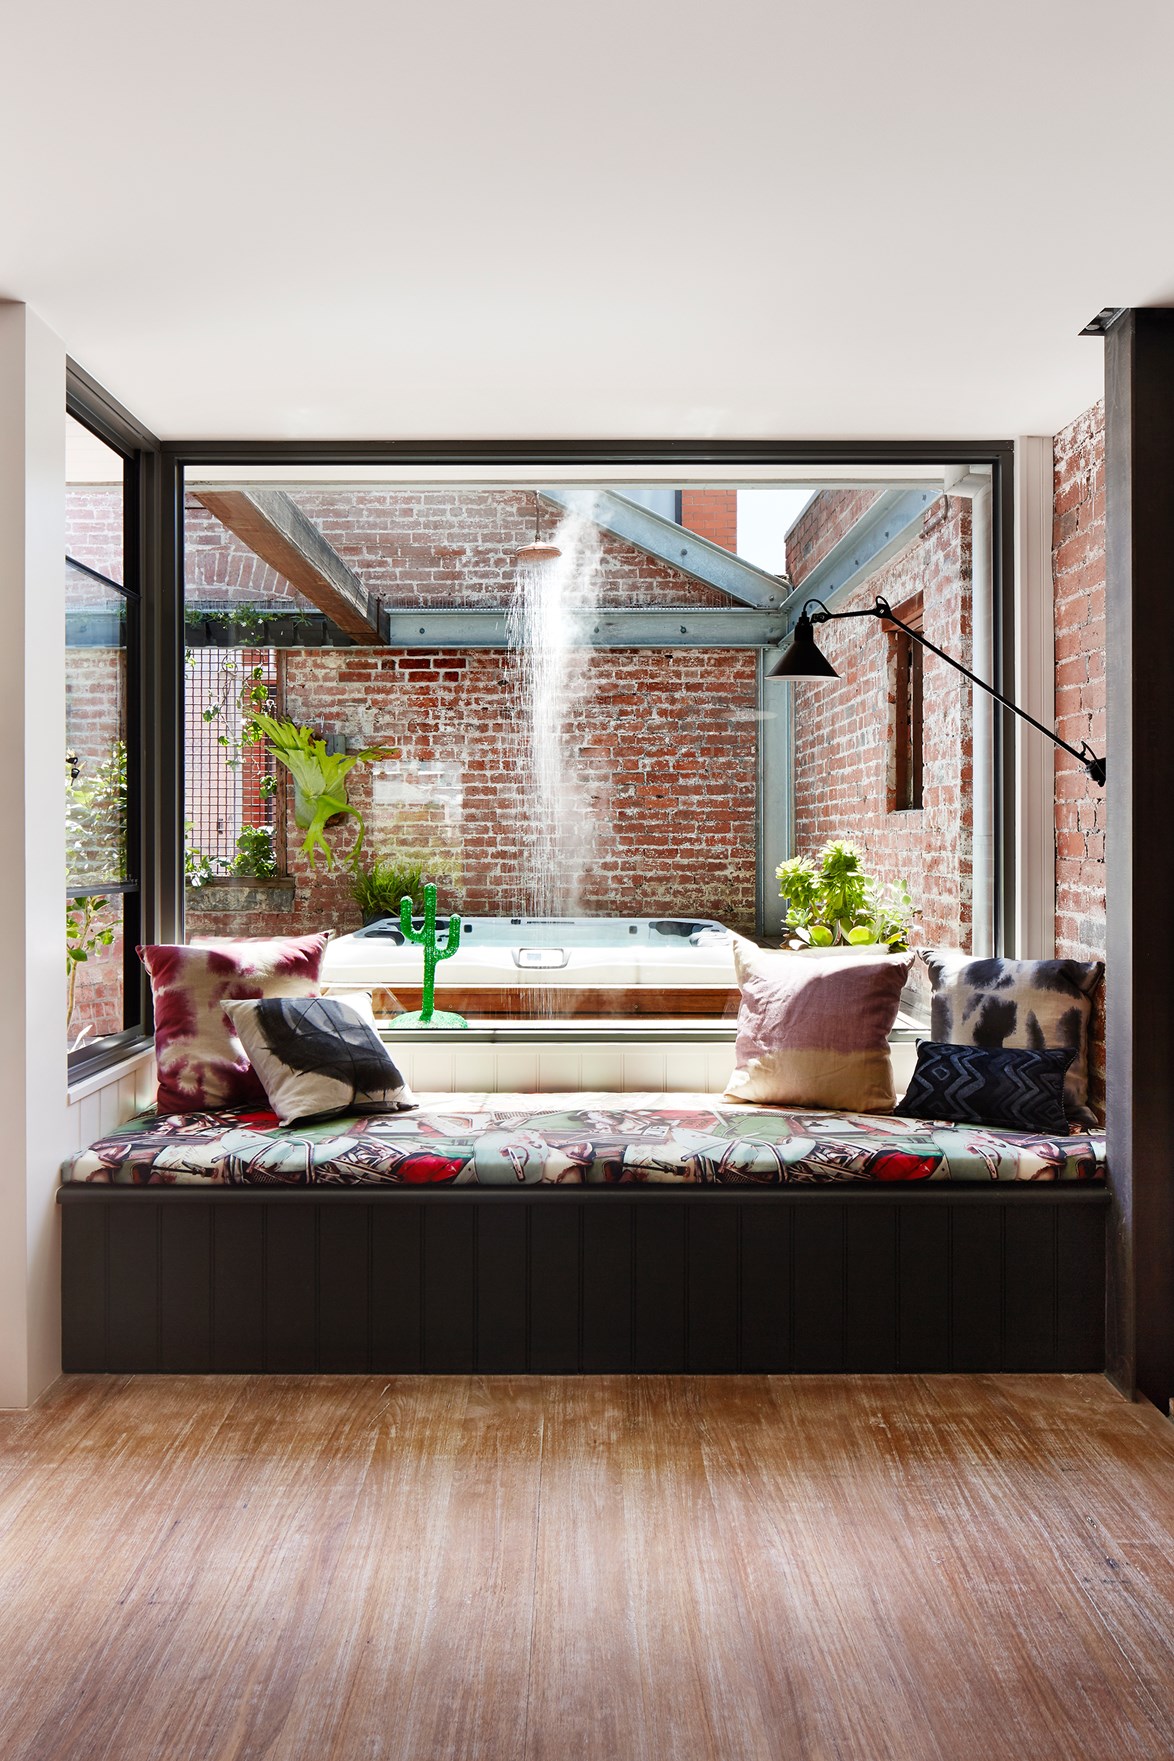 Positioned under a picture window, this built-in daybed overlooking the outdoor spa/shower area is a sought-after spot in this [lofty Melbourne warehouse](https://www.homestolove.com.au/cosying-up-a-melbourne-warehouse-conversion-3653|target="_blank"). *Photo:* Armelle Habib